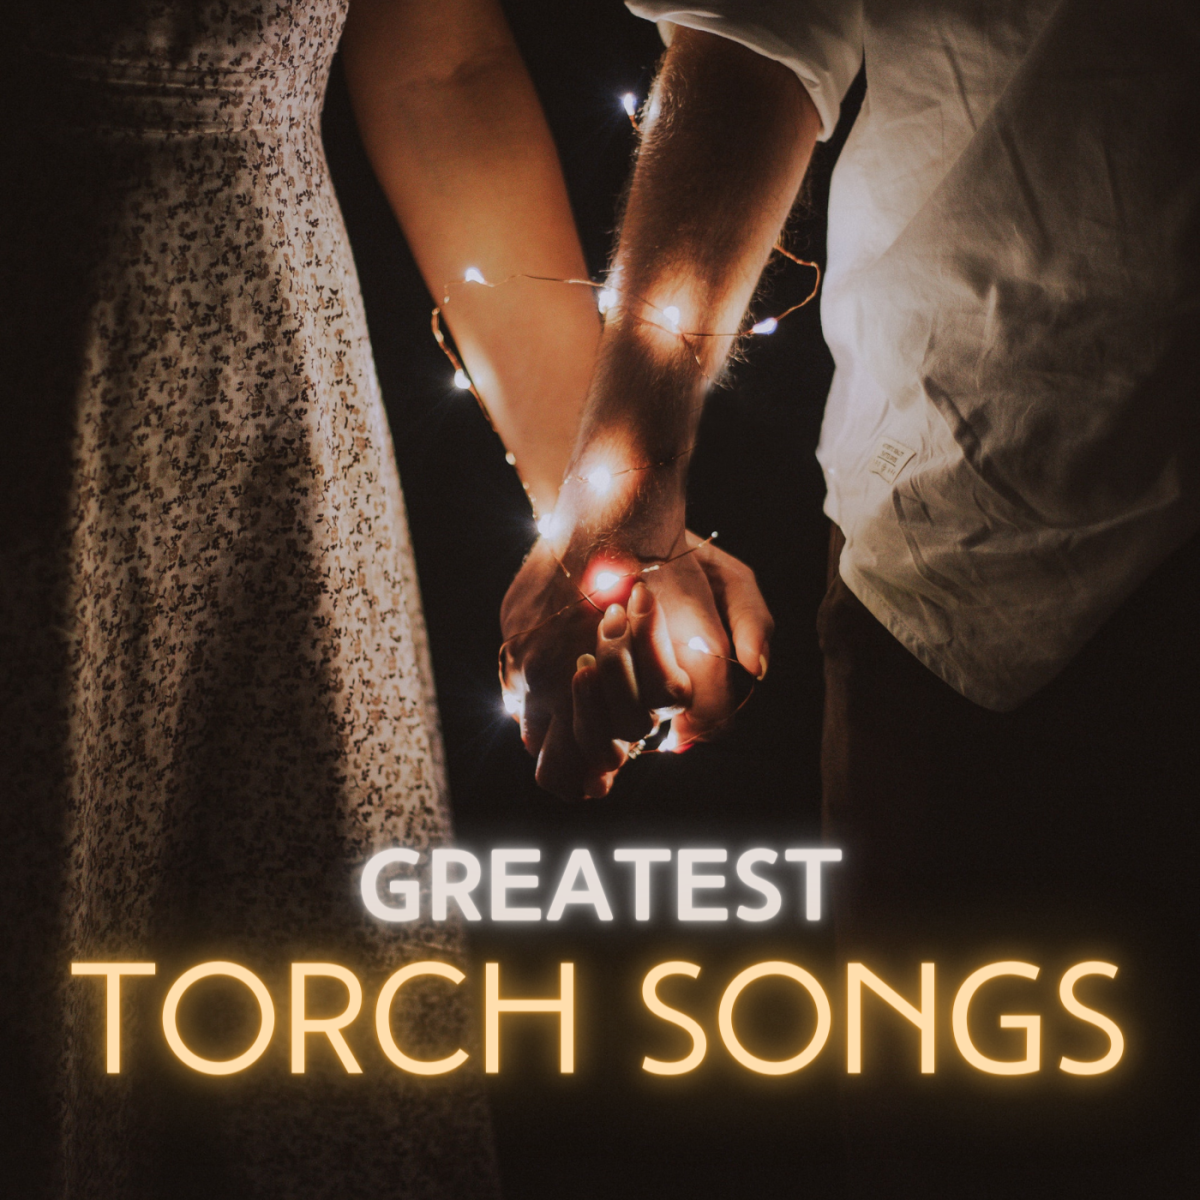 Do you still have a torch burning for someone? Hold it high with this list of classic torch songs.